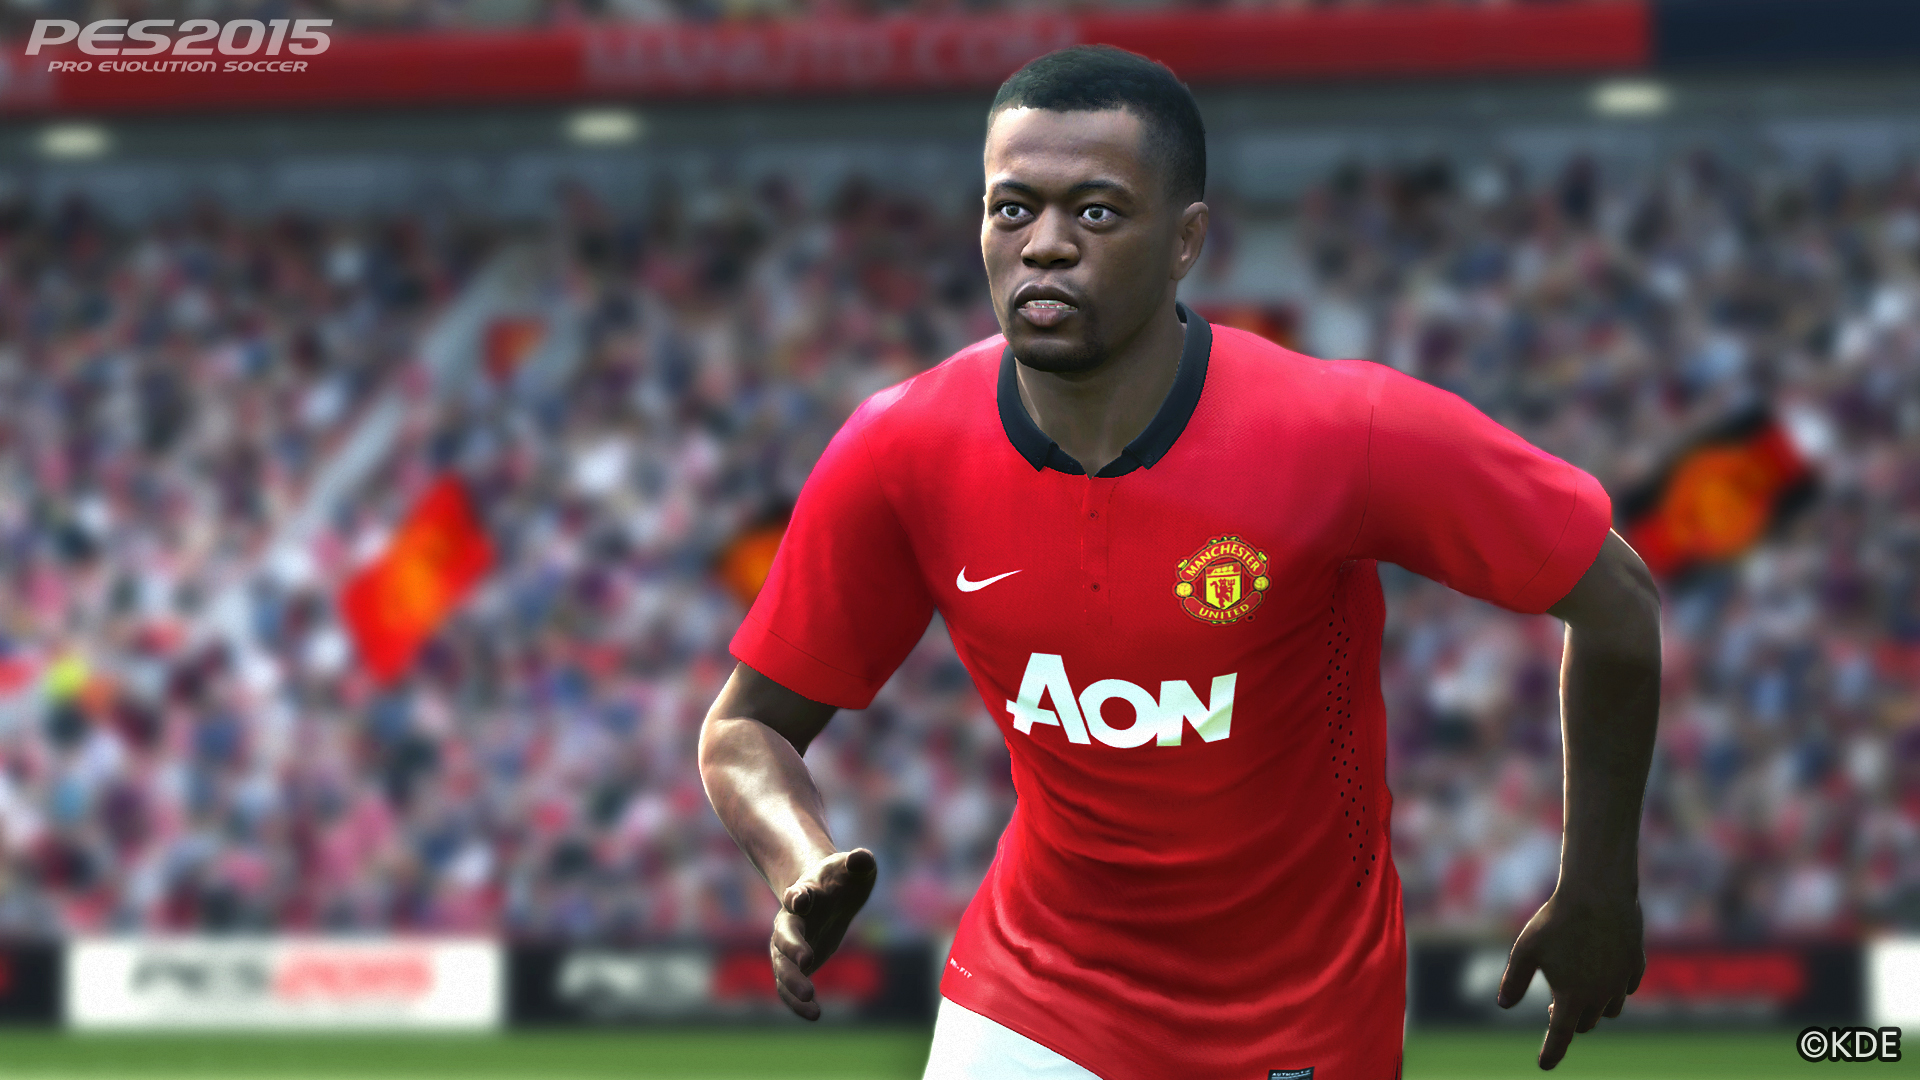 PES 2015 First Screens #5